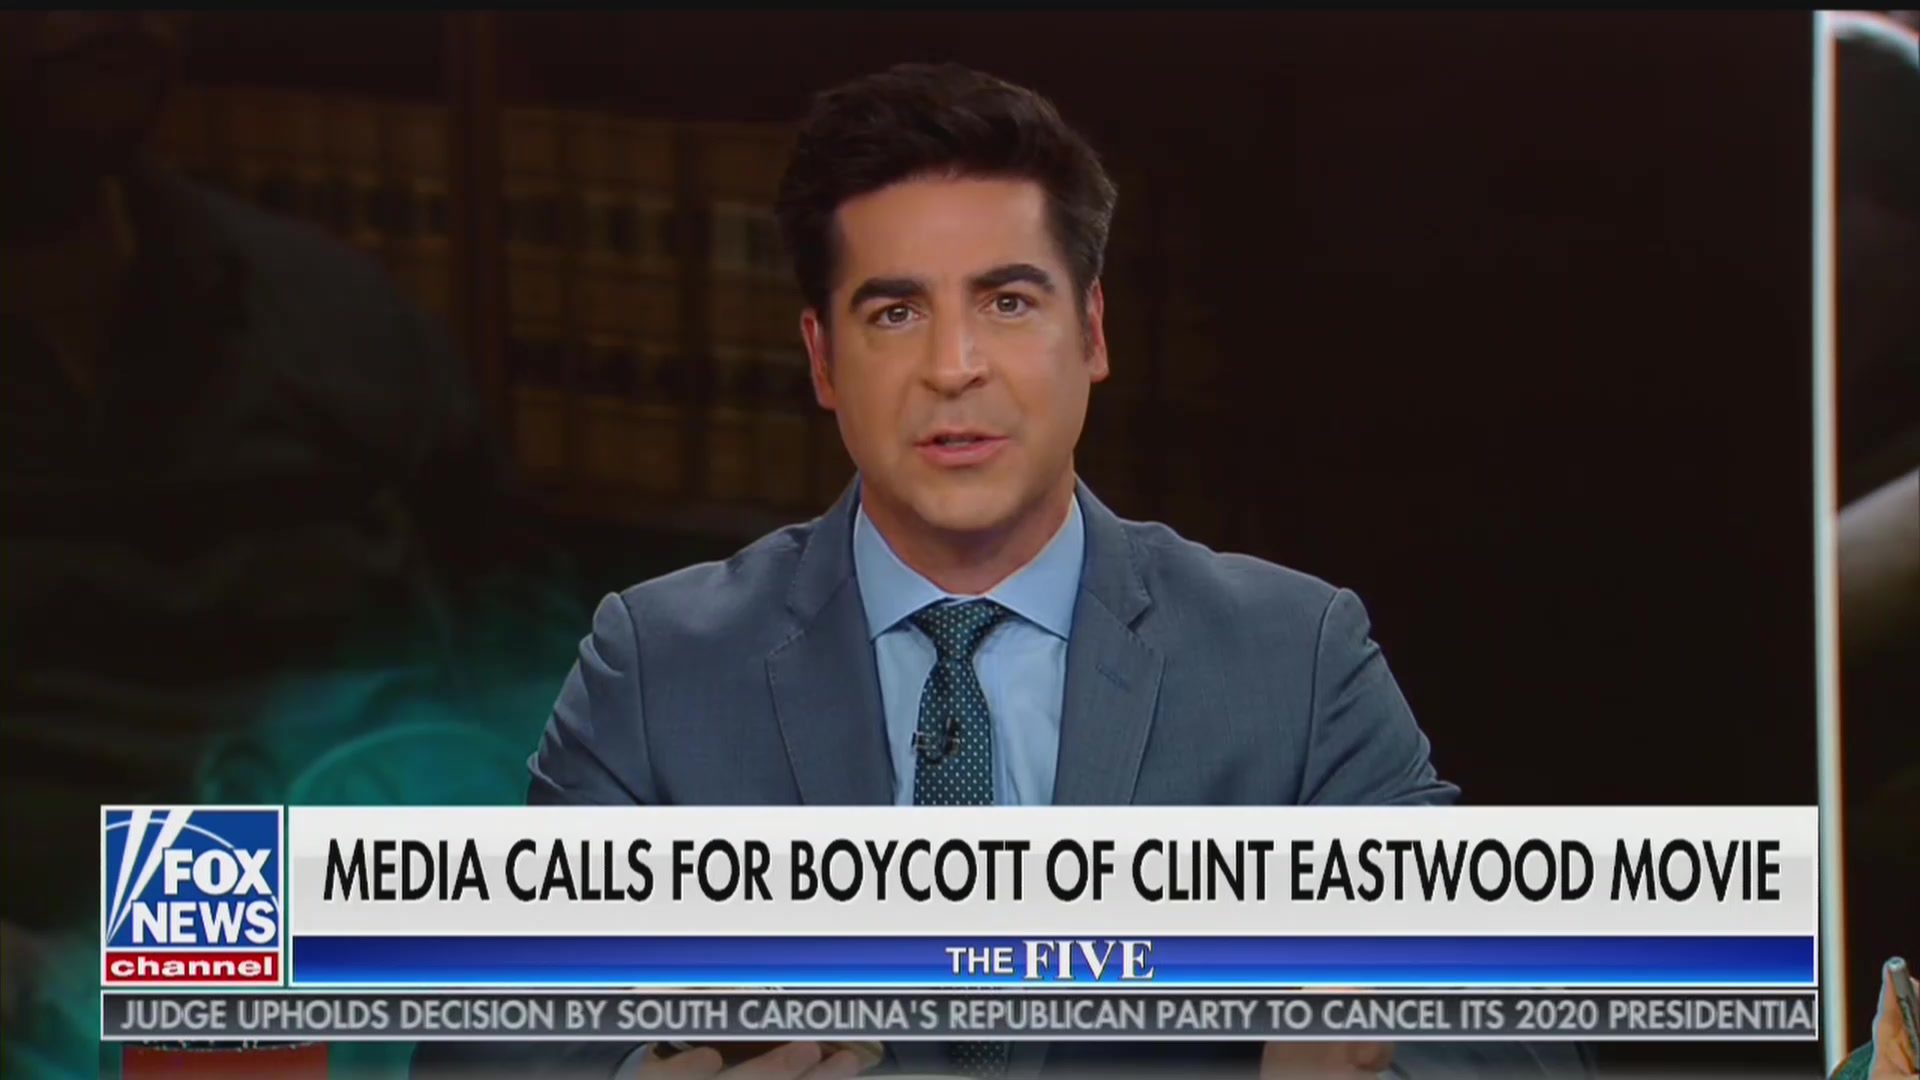 Jesse Watters: Women Reporters Sleep With Sources ‘All the Time’